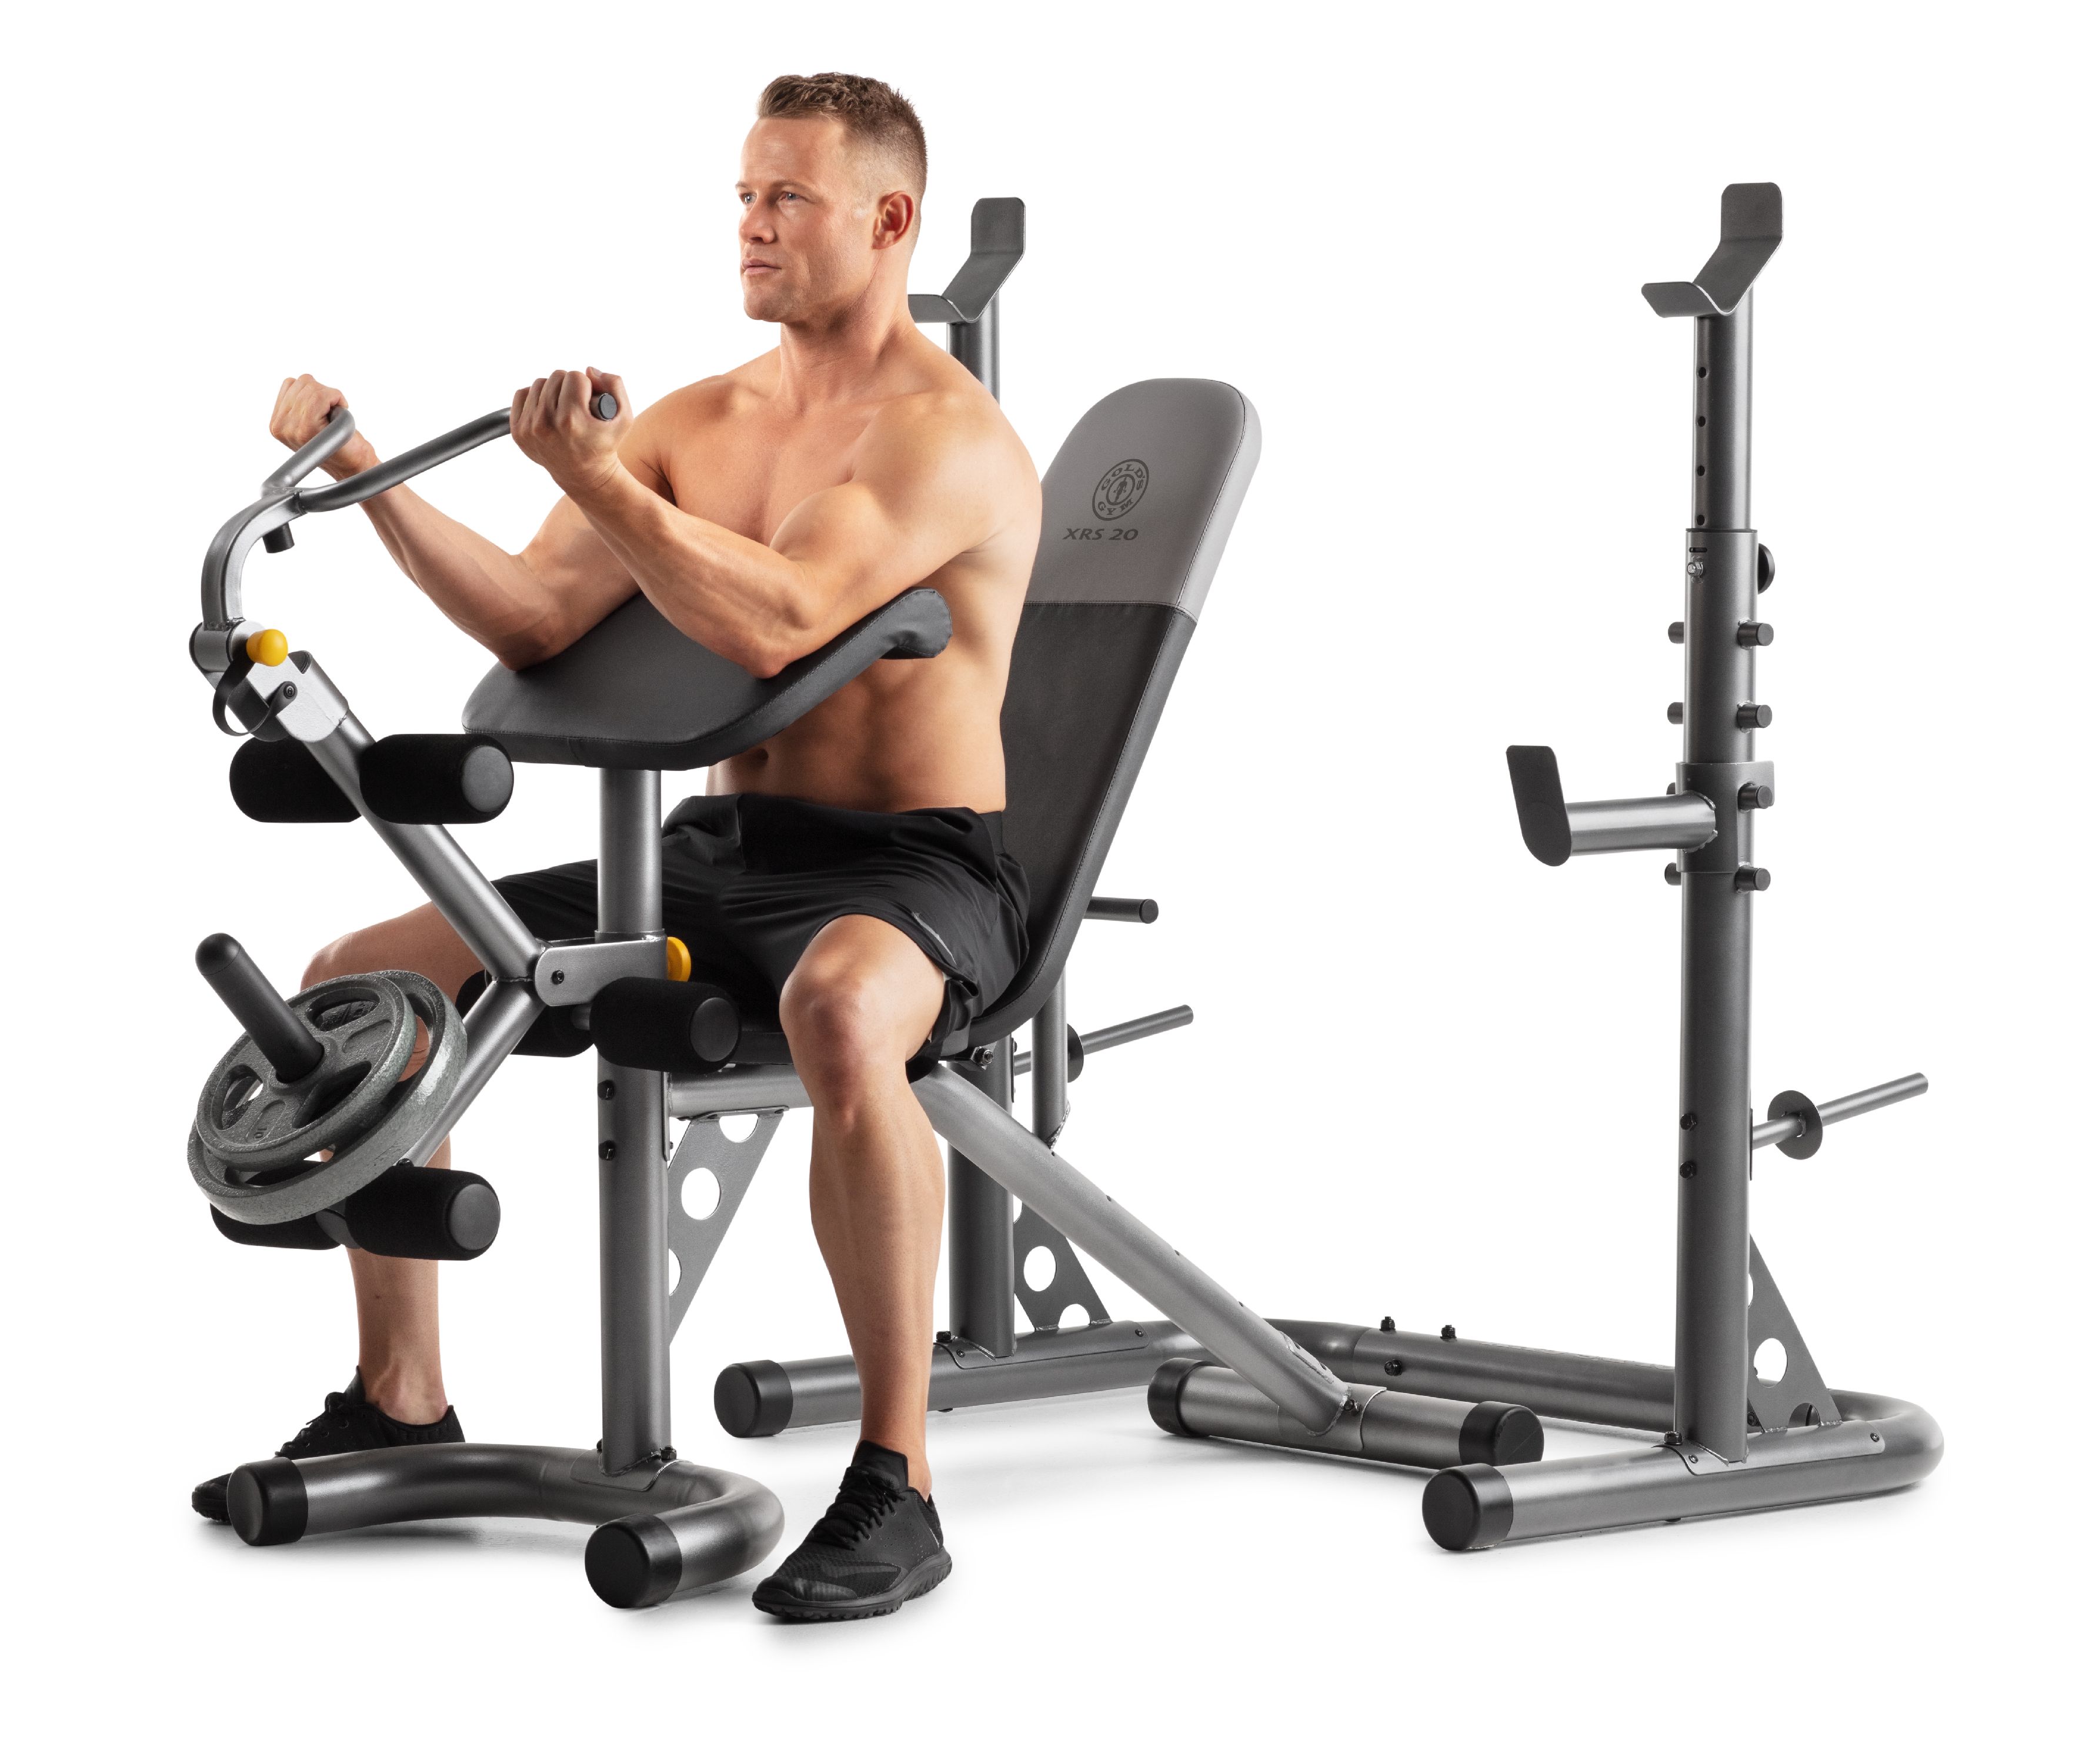 Buy Golds Gym Xrs 20 Adjustable Olympic Workout Bench With Squat Rack